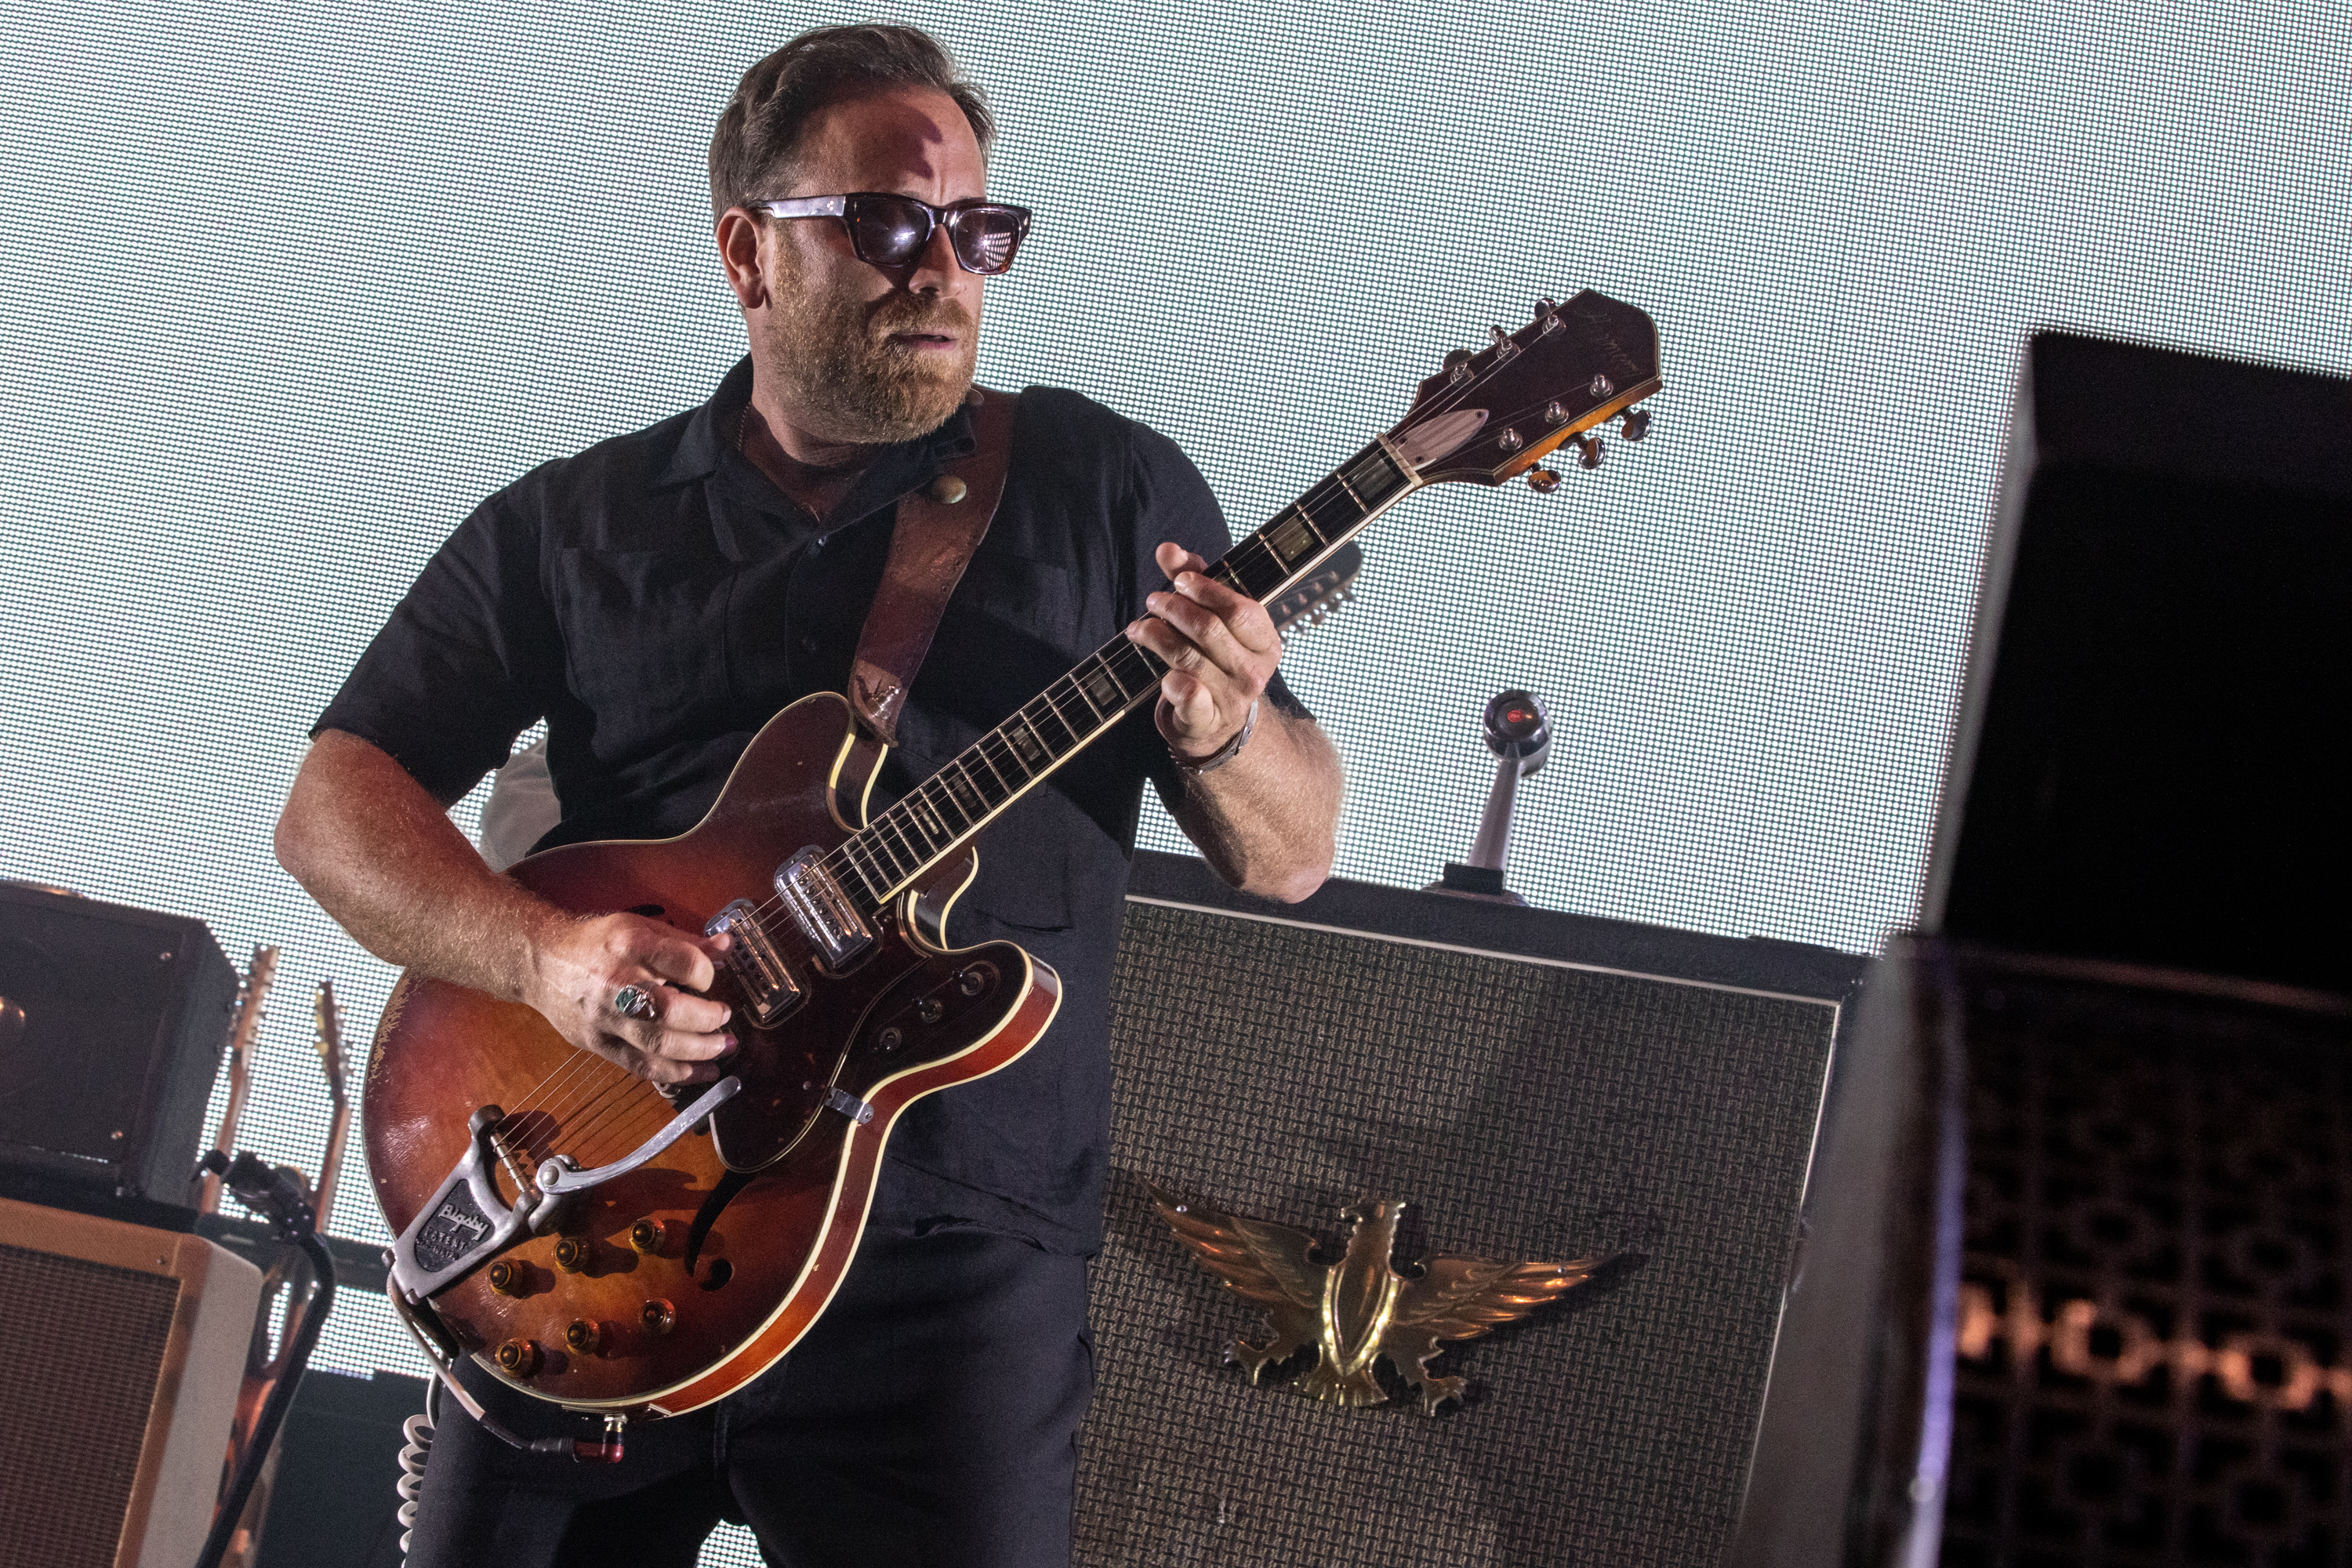 The Black Keys: Delta Kream review – stripped-back simmering blues, Pop  and rock